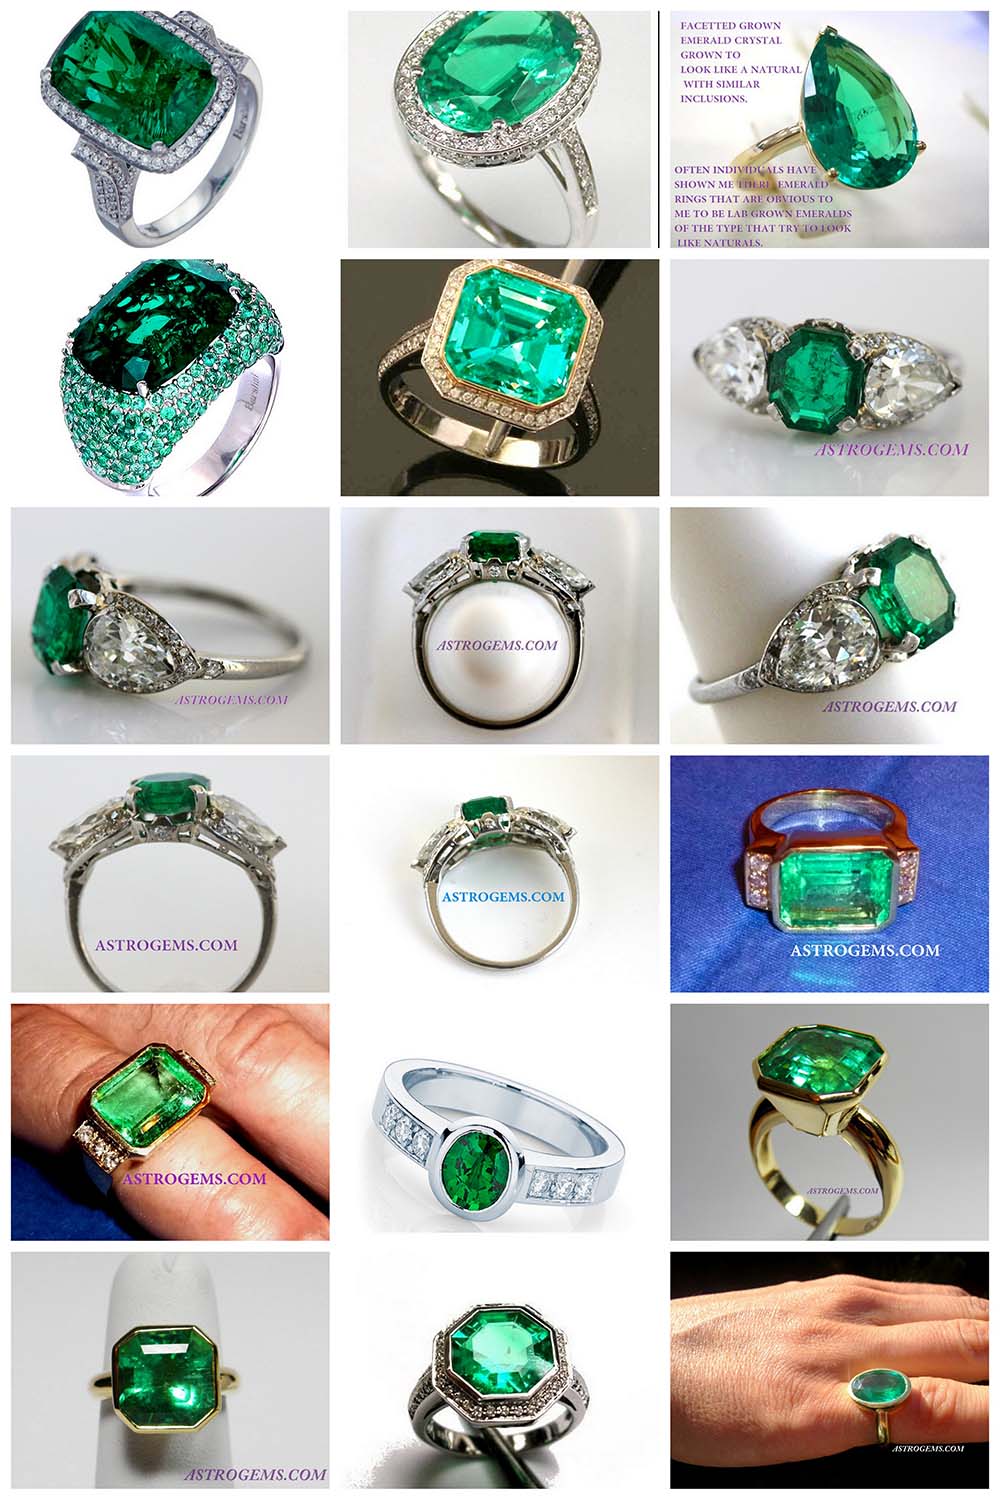 Astrogems can create a wide variety of ayurvedic emerald rings.